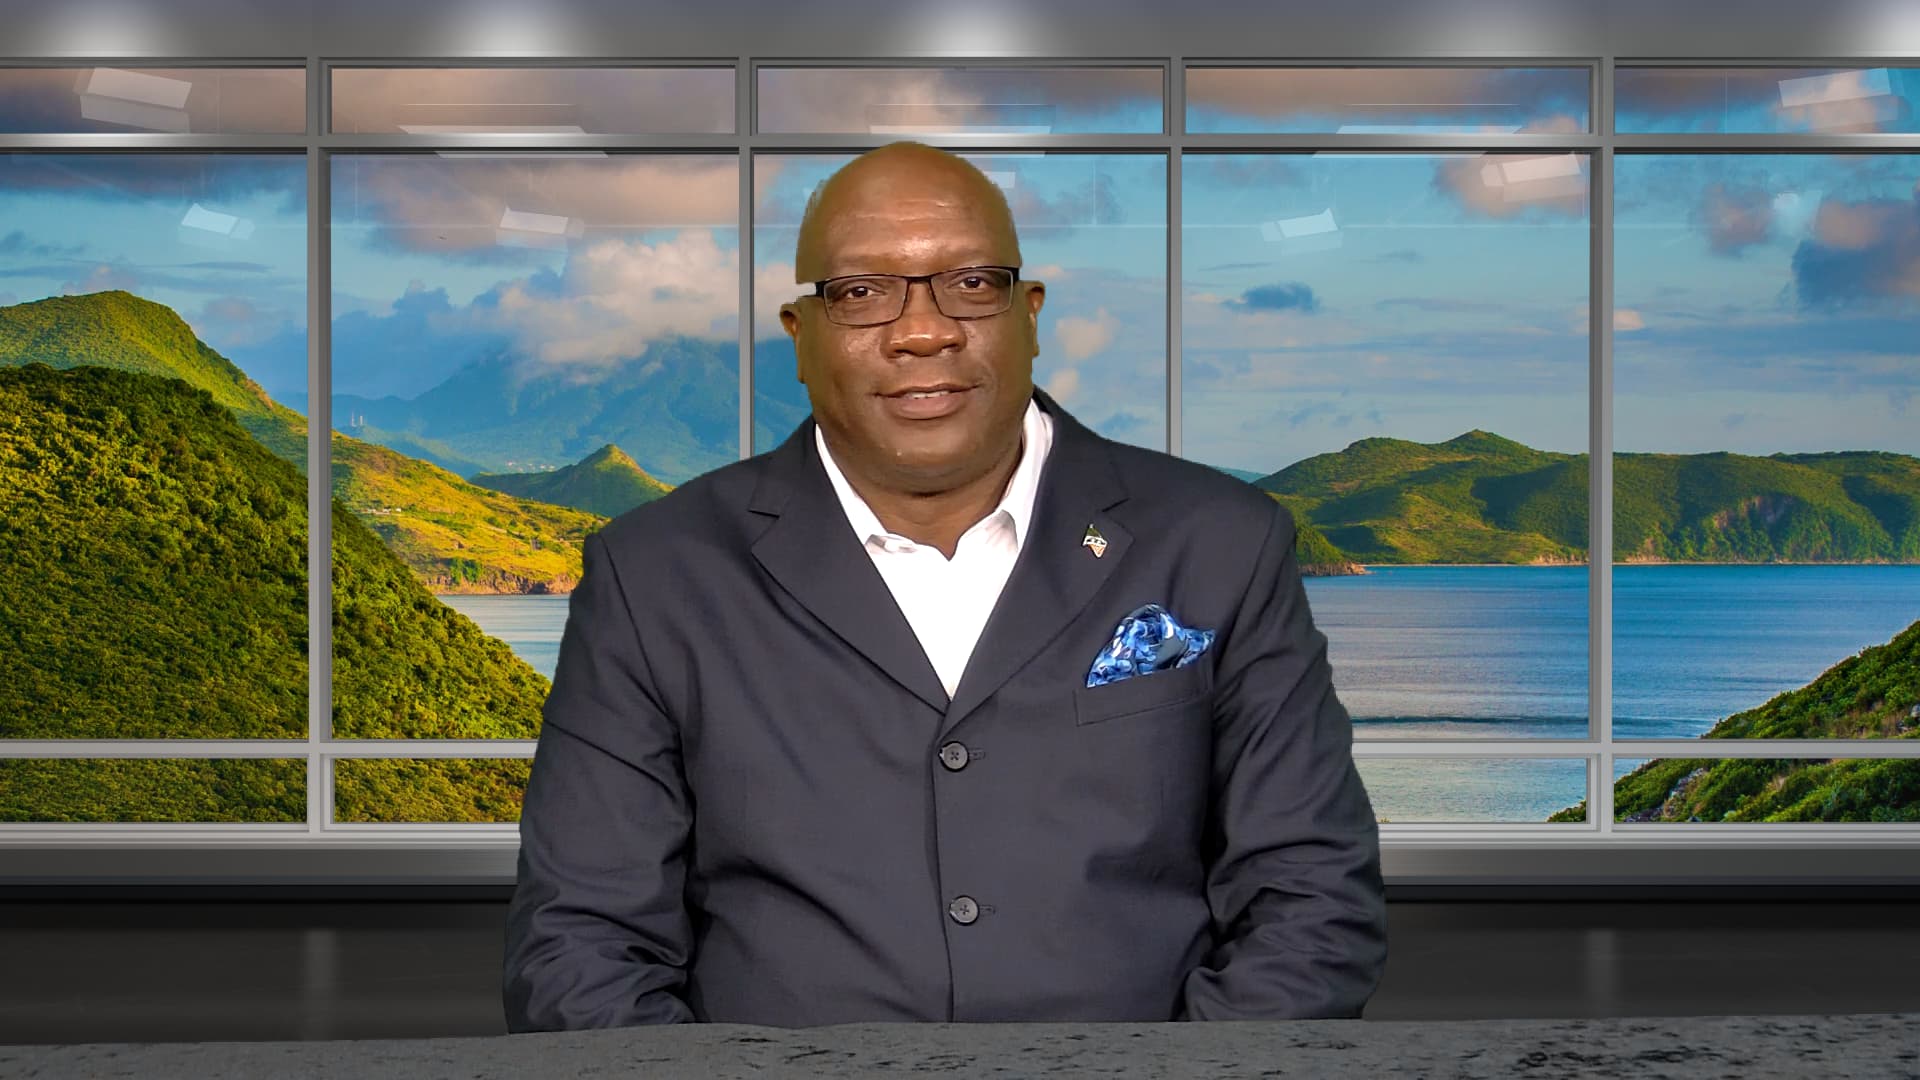 St Kitts Prime Minister Requests More Vaccines To Reach ...